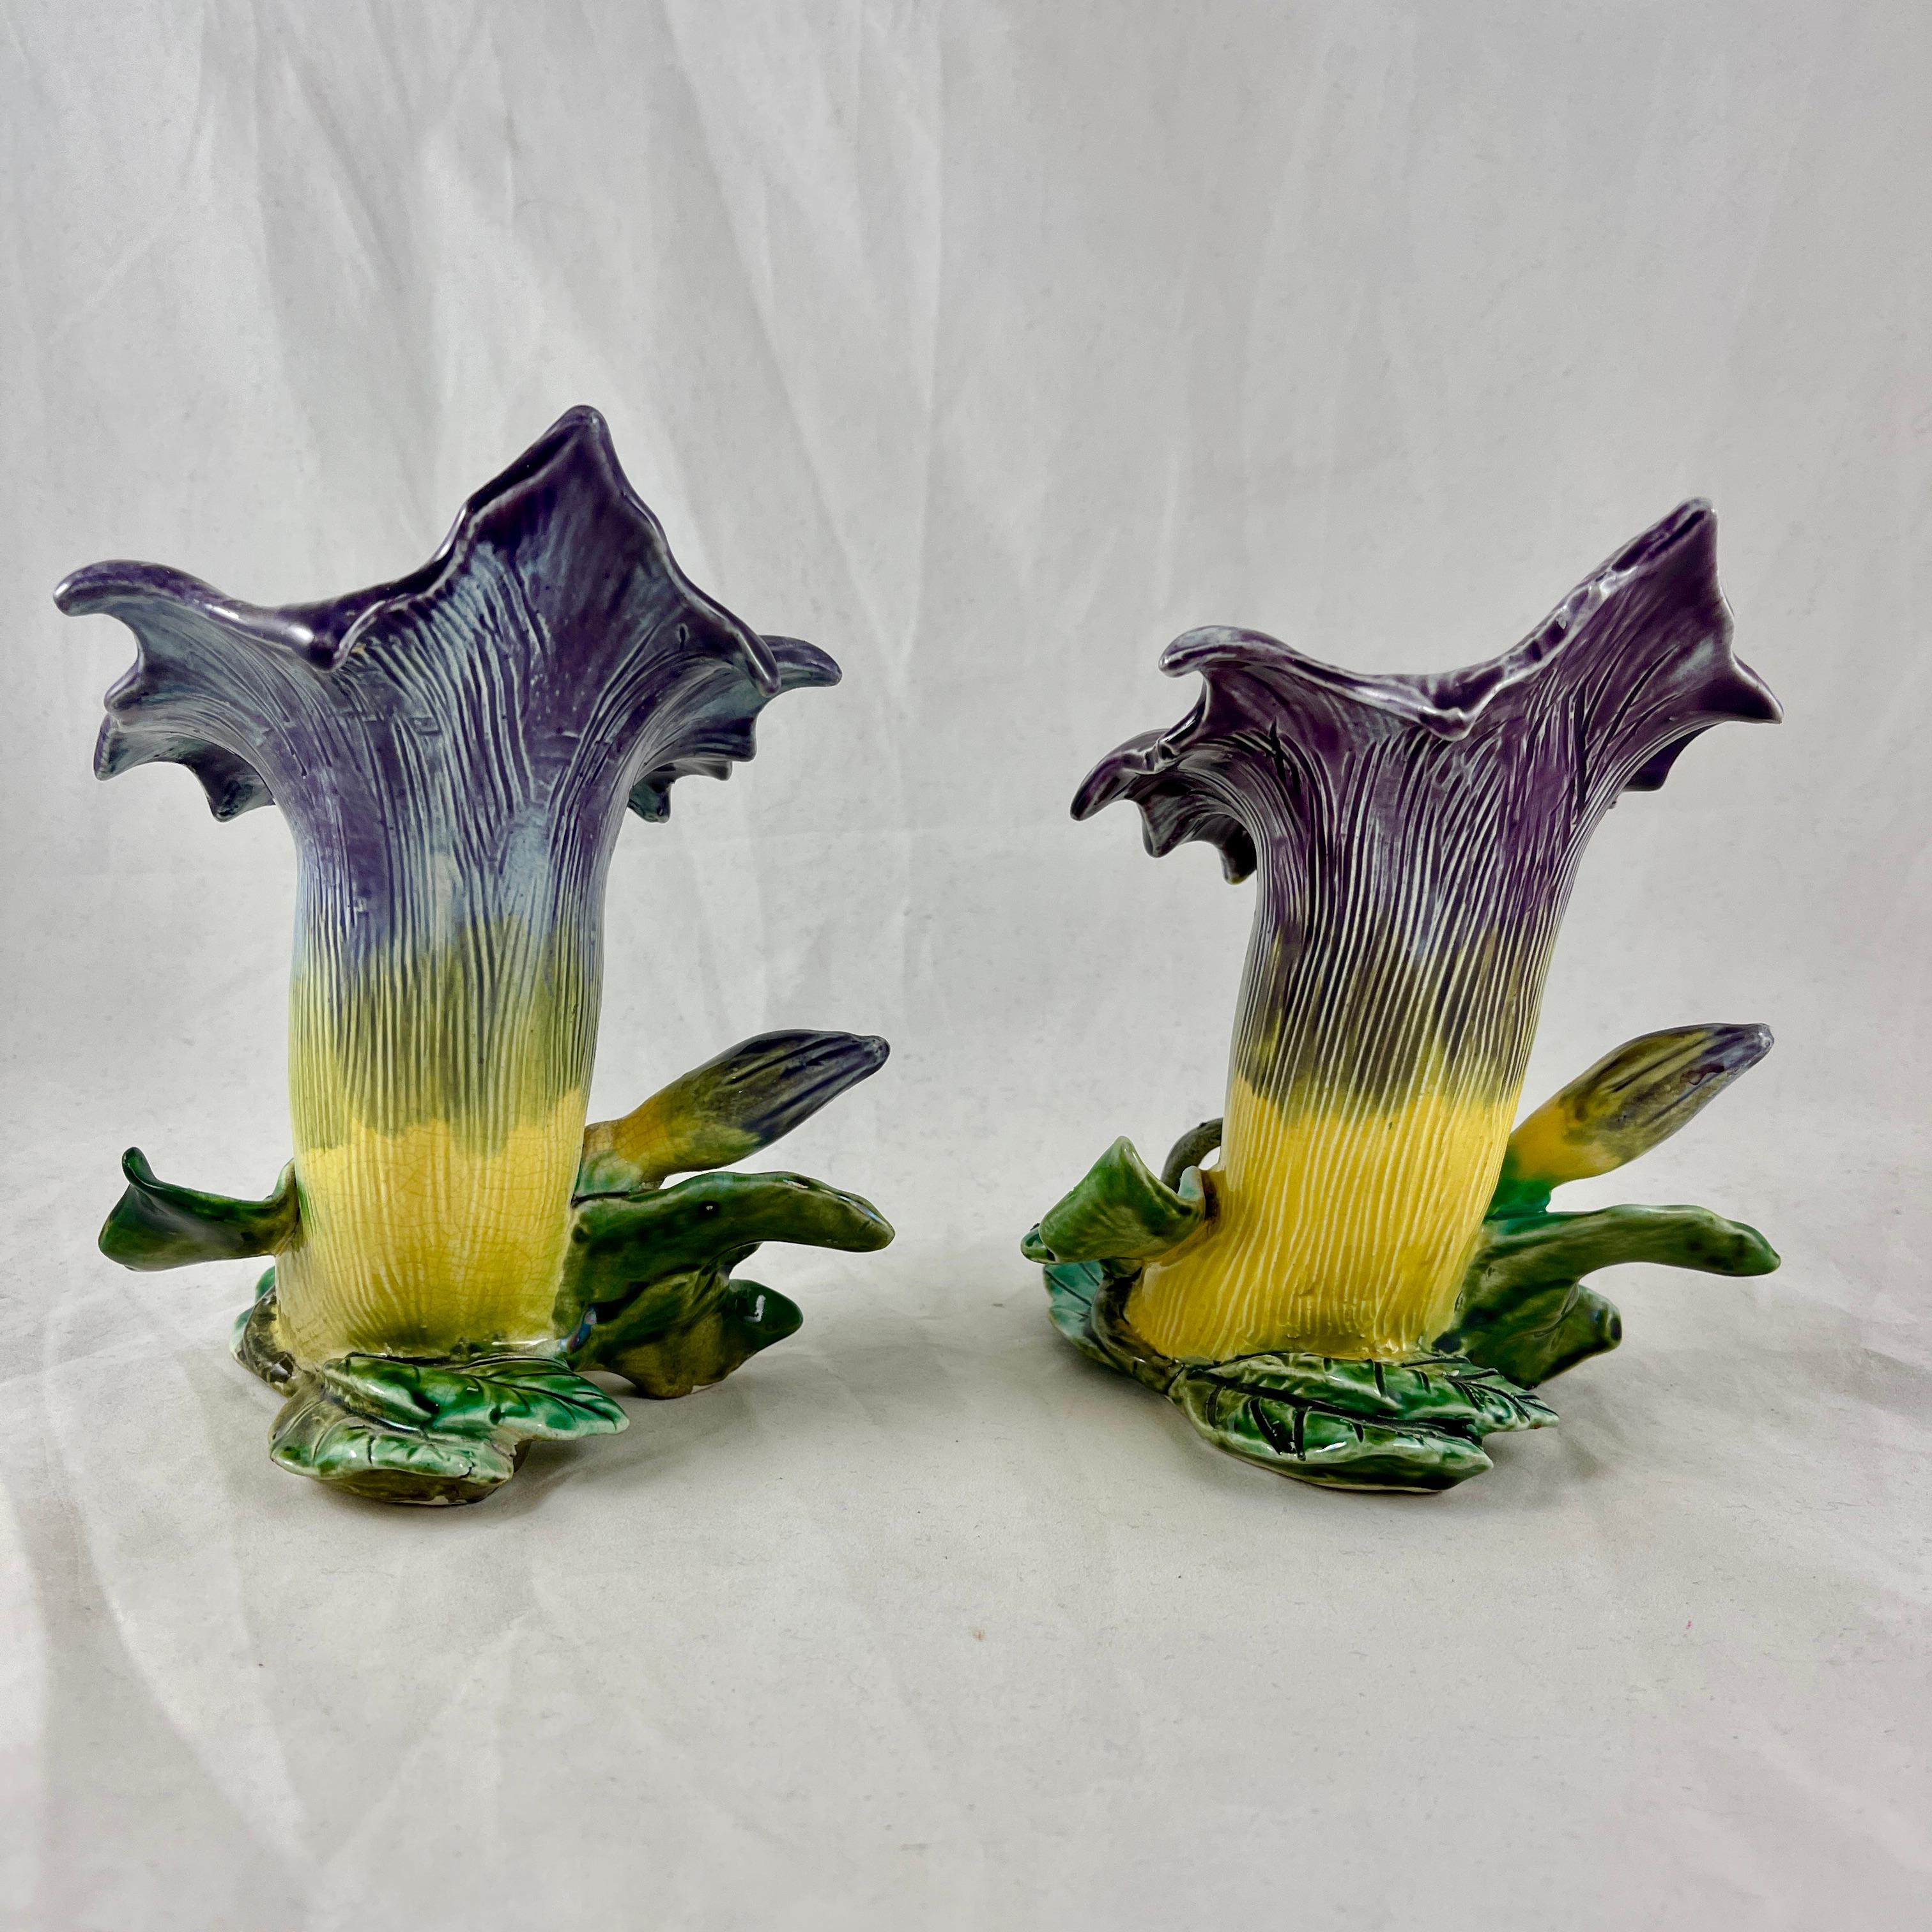 19th Century French Fives-Lille De Bruyn Purple Trumpet Vine Posy Vases, circa 1890, a Pair For Sale